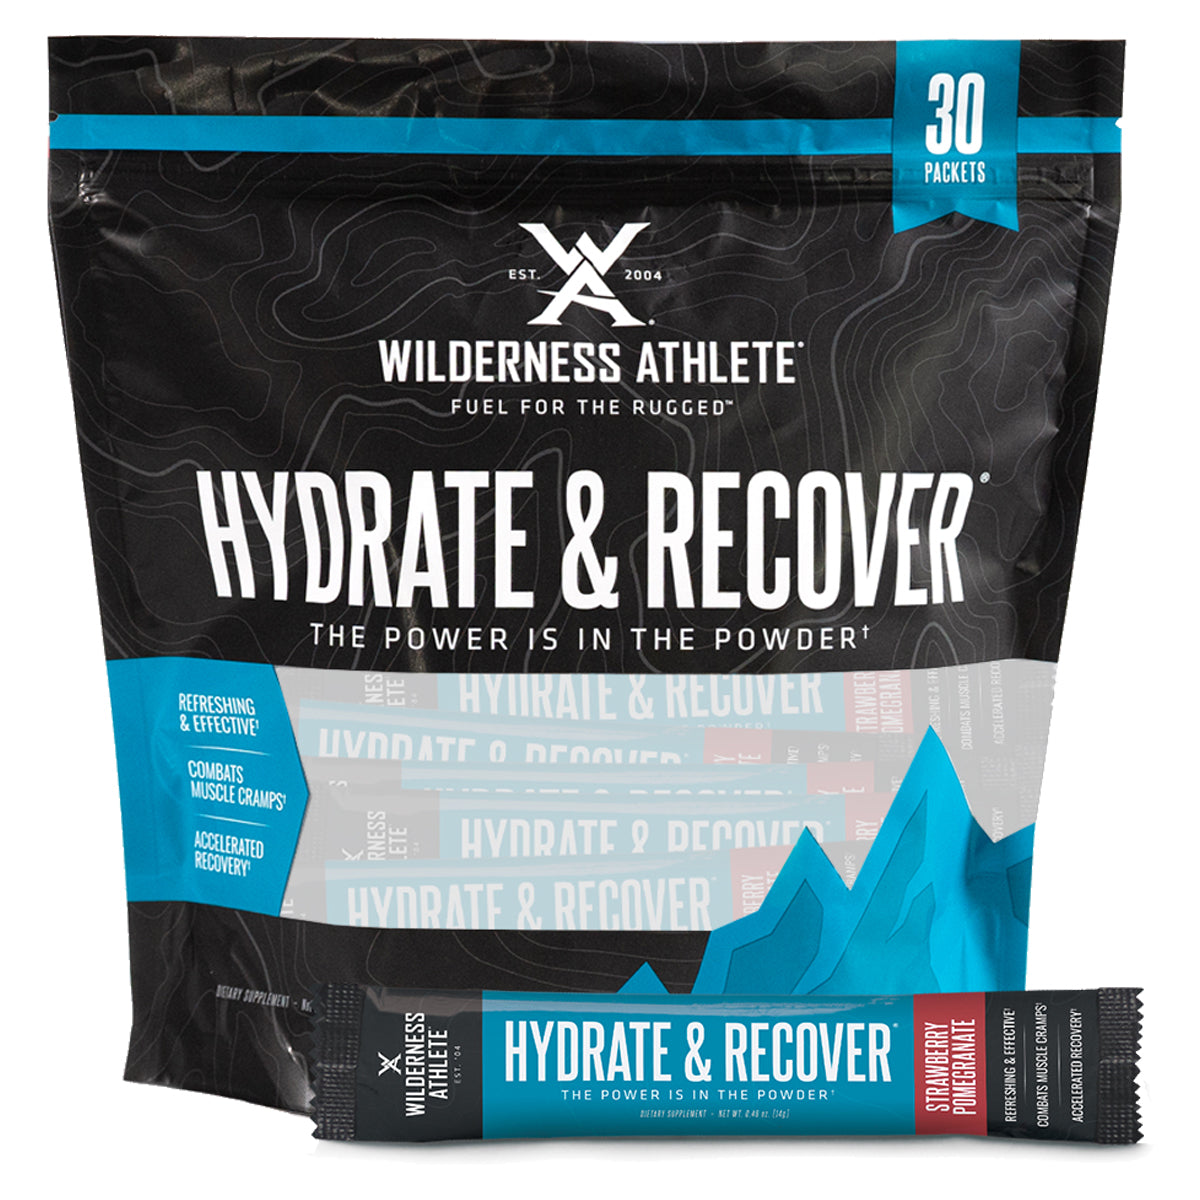 Wilderness Athlete Hydrate and Recover Packets in  by GOHUNT | Wilderness Athlete - GOHUNT Shop